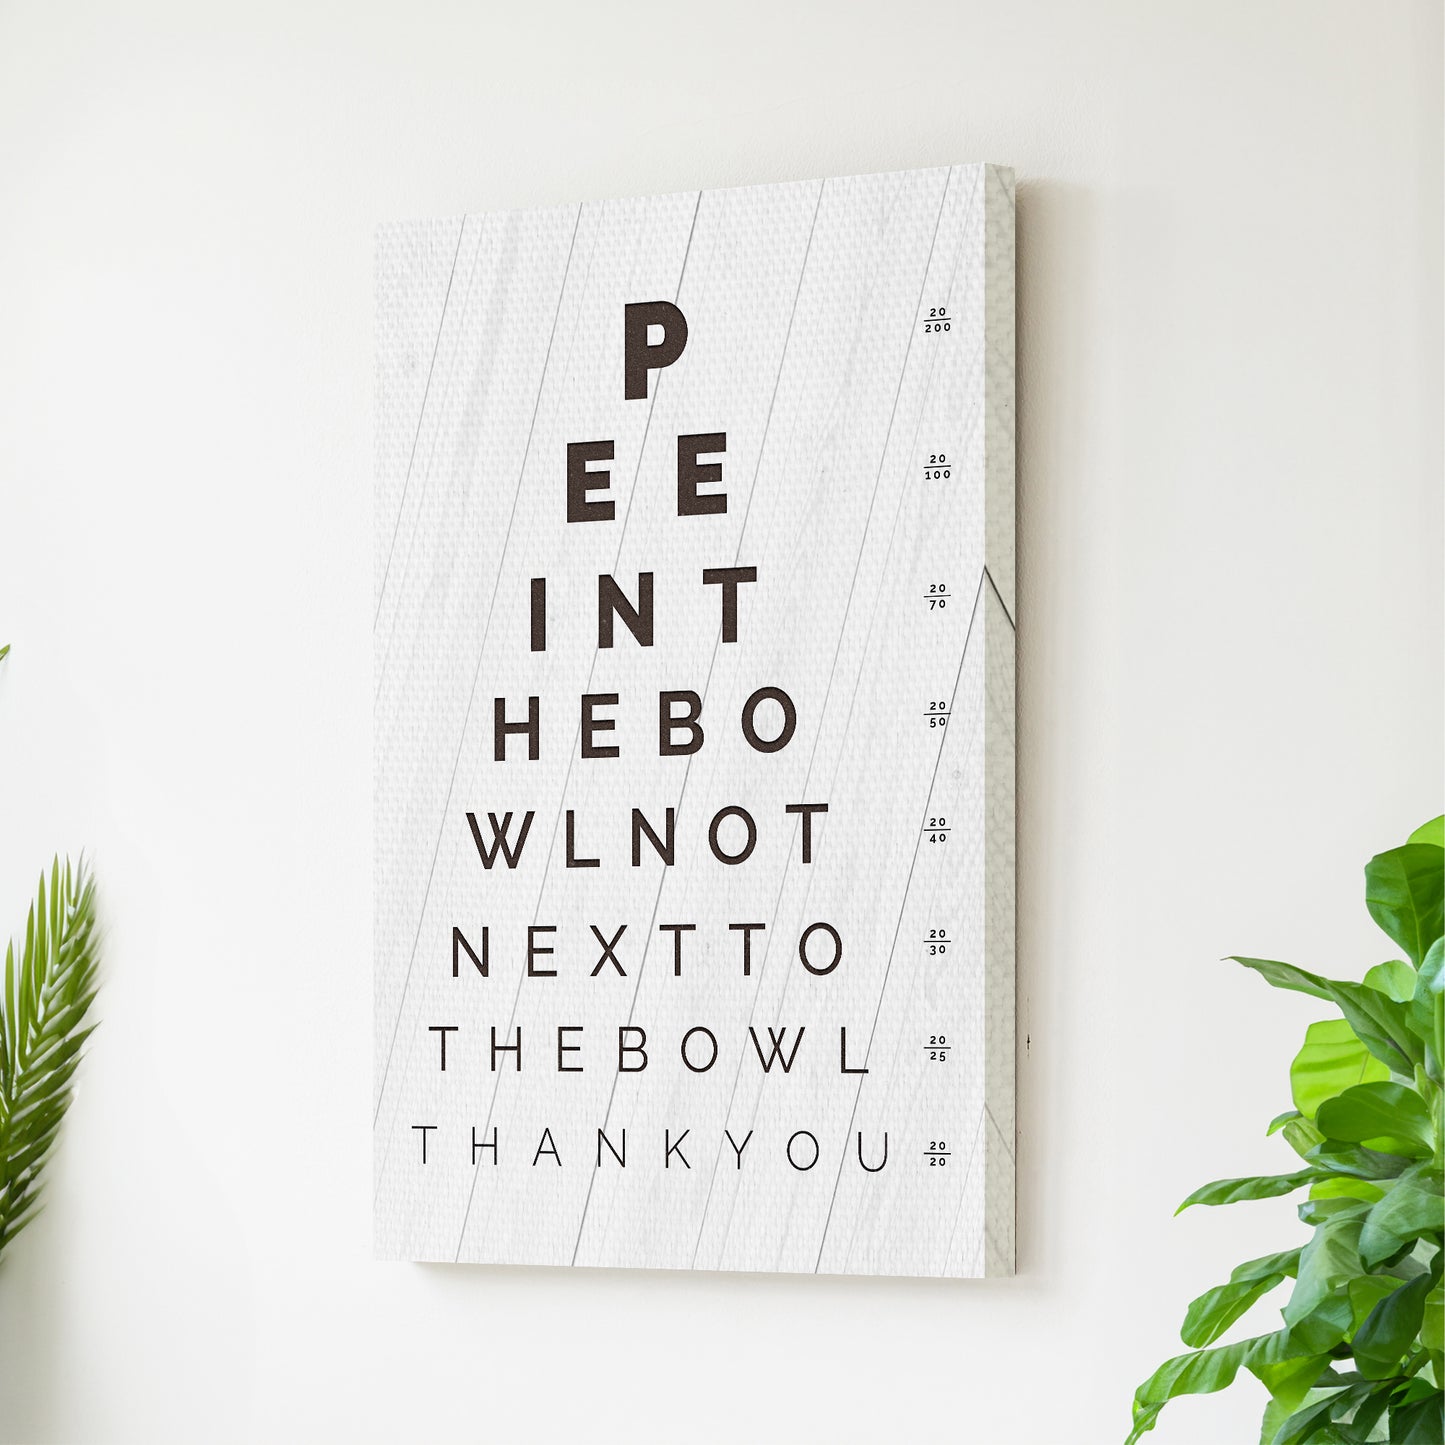 Restroom Eye Exam Sign - Imaged by Tailored Canvases